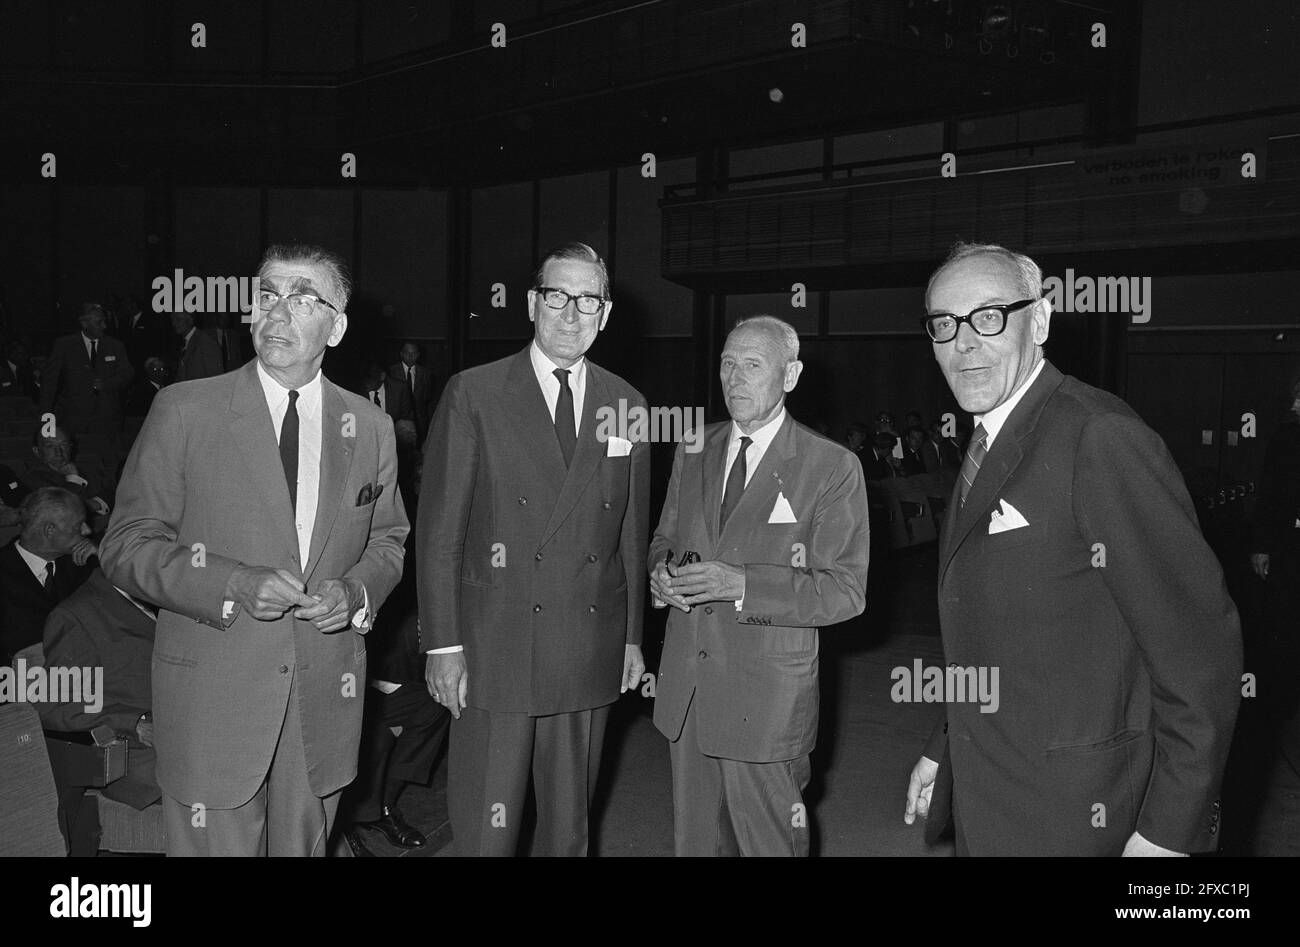 Jubilee reception on the occasion of Shipping Association North in RAI. Van Dijk (dir.Sch.Noord), Warnings (chairman.N.), 18 July 1967, Scheepvaart, jubilees, The Netherlands, 20th century press agency photo, news to remember, documentary, historic photography 1945-1990, visual stories, human history of the Twentieth Century, capturing moments in time Stock Photo